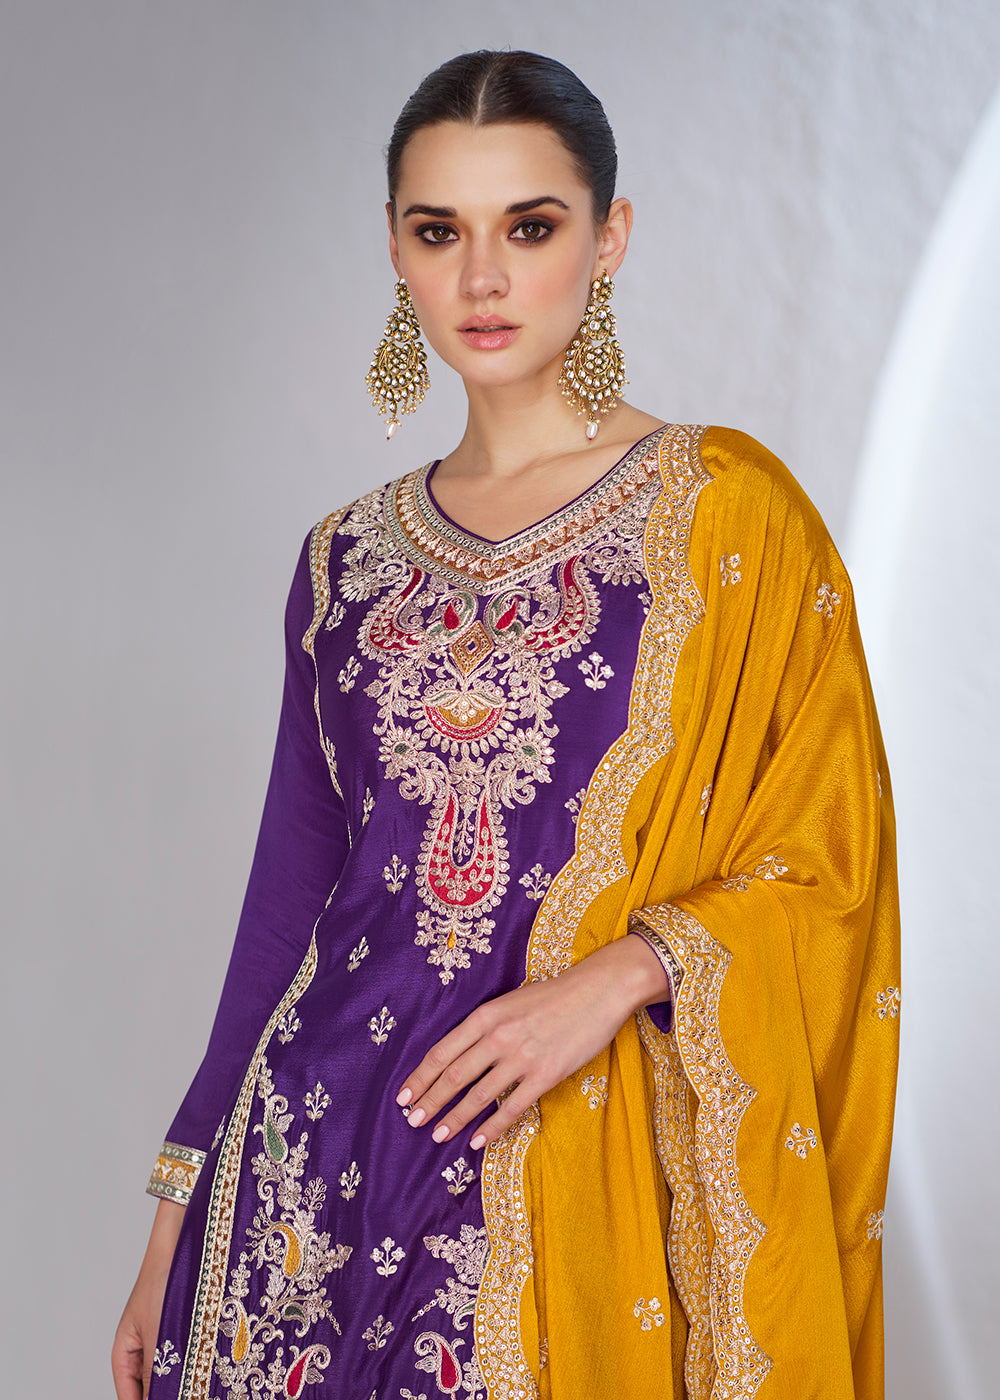 Buy Now Purple & Teal Ceremonial Designer Palazzo Suit Online in USA, UK, Canada, Germany, Australia & Worldwide at Empress Clothing.